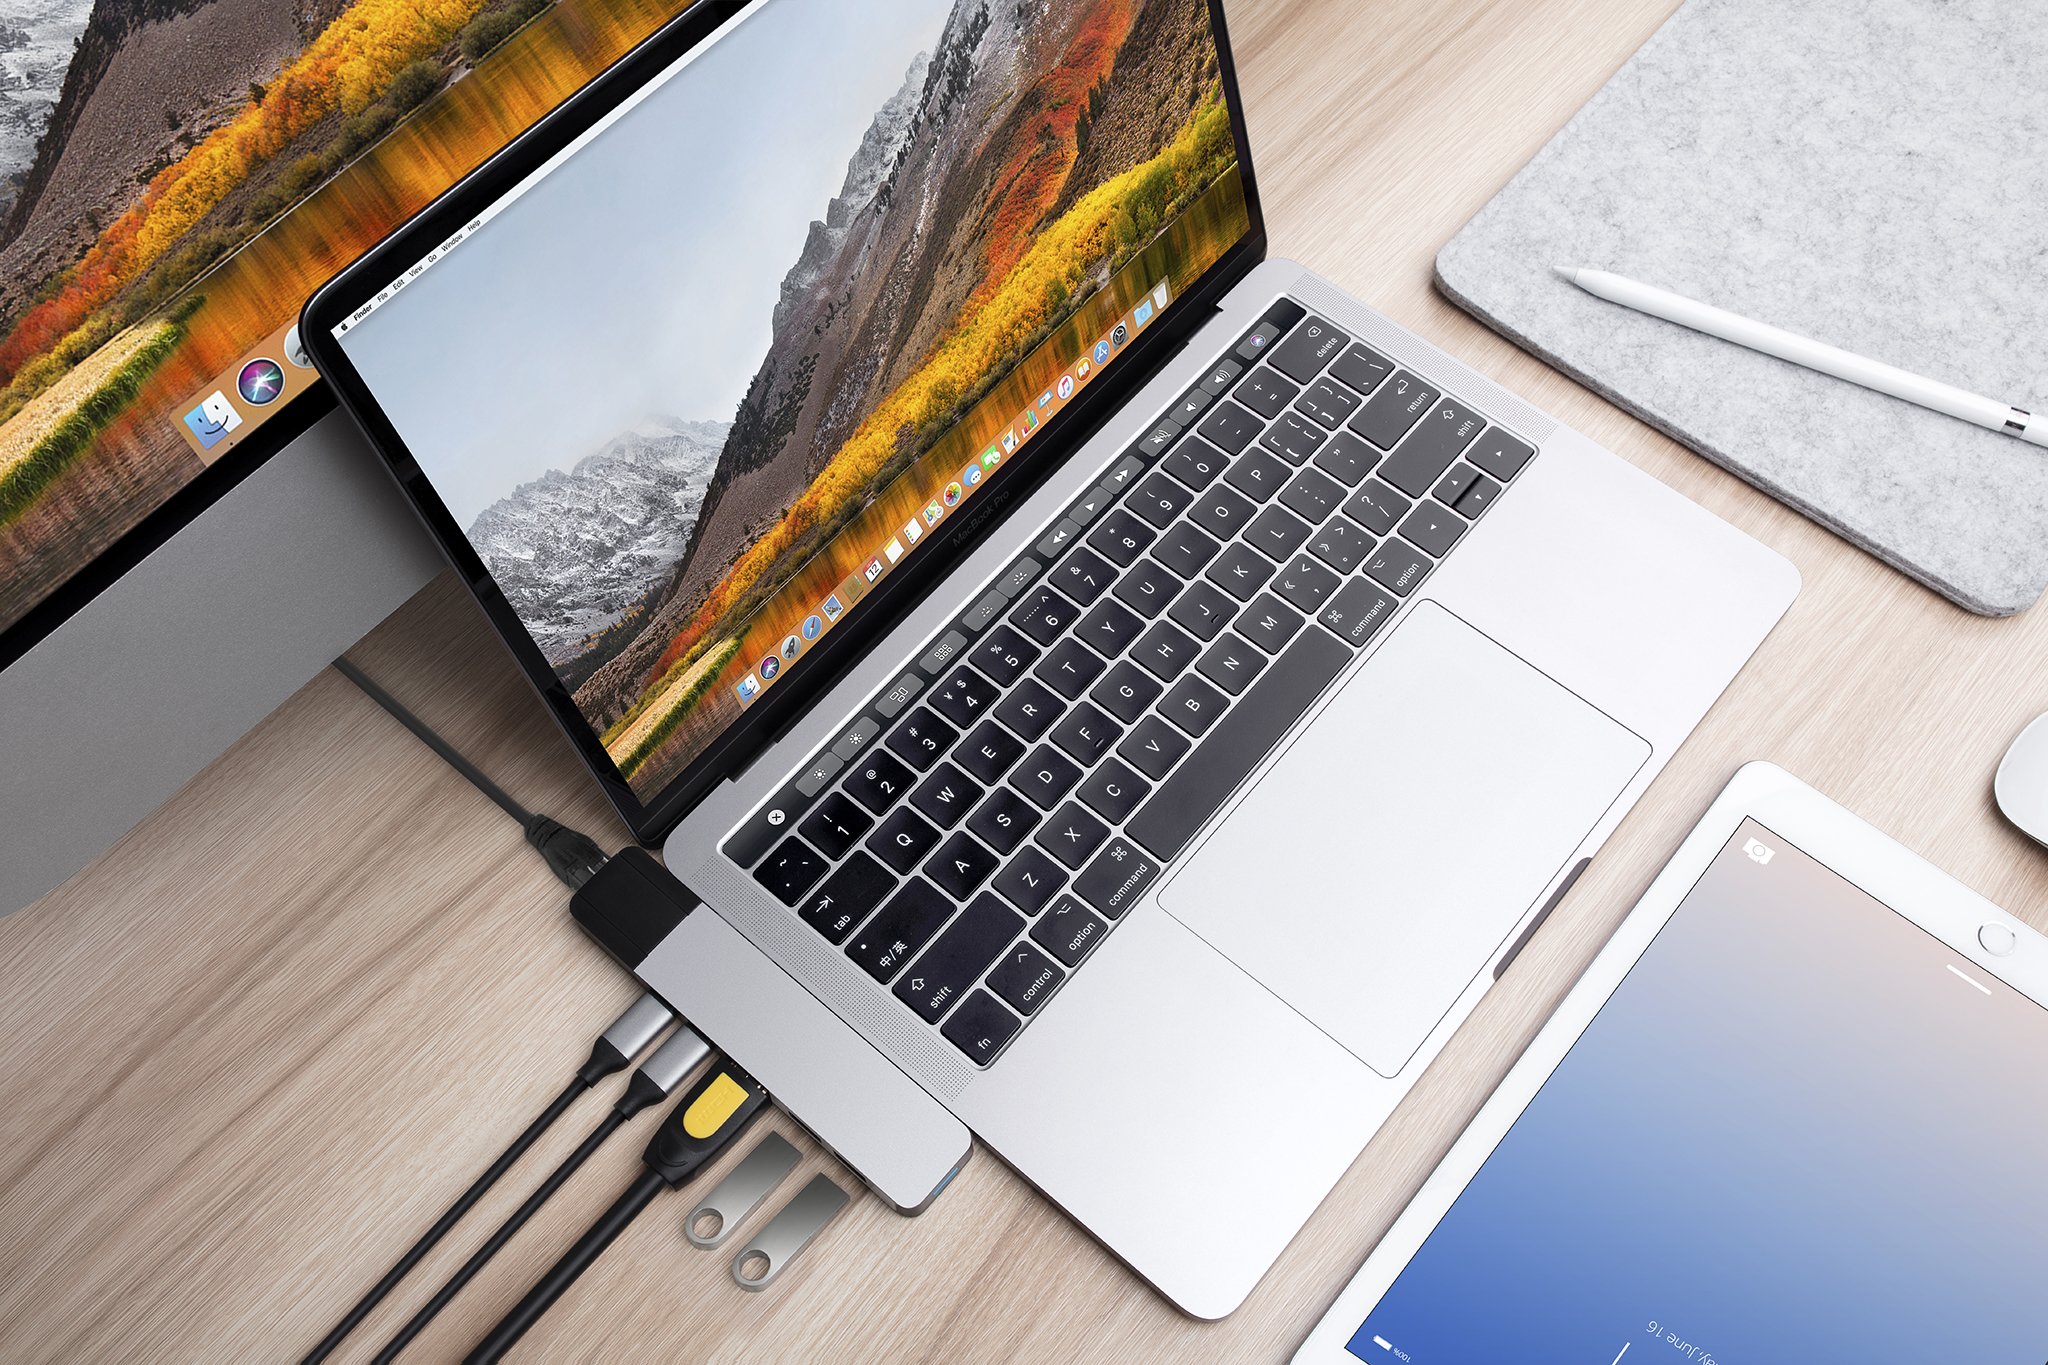 Hands-on: HyperDrive Thunderbolt 3 USB-C Hub might be the ultimate MacBook  Pro dongle [Video] - 9to5Mac